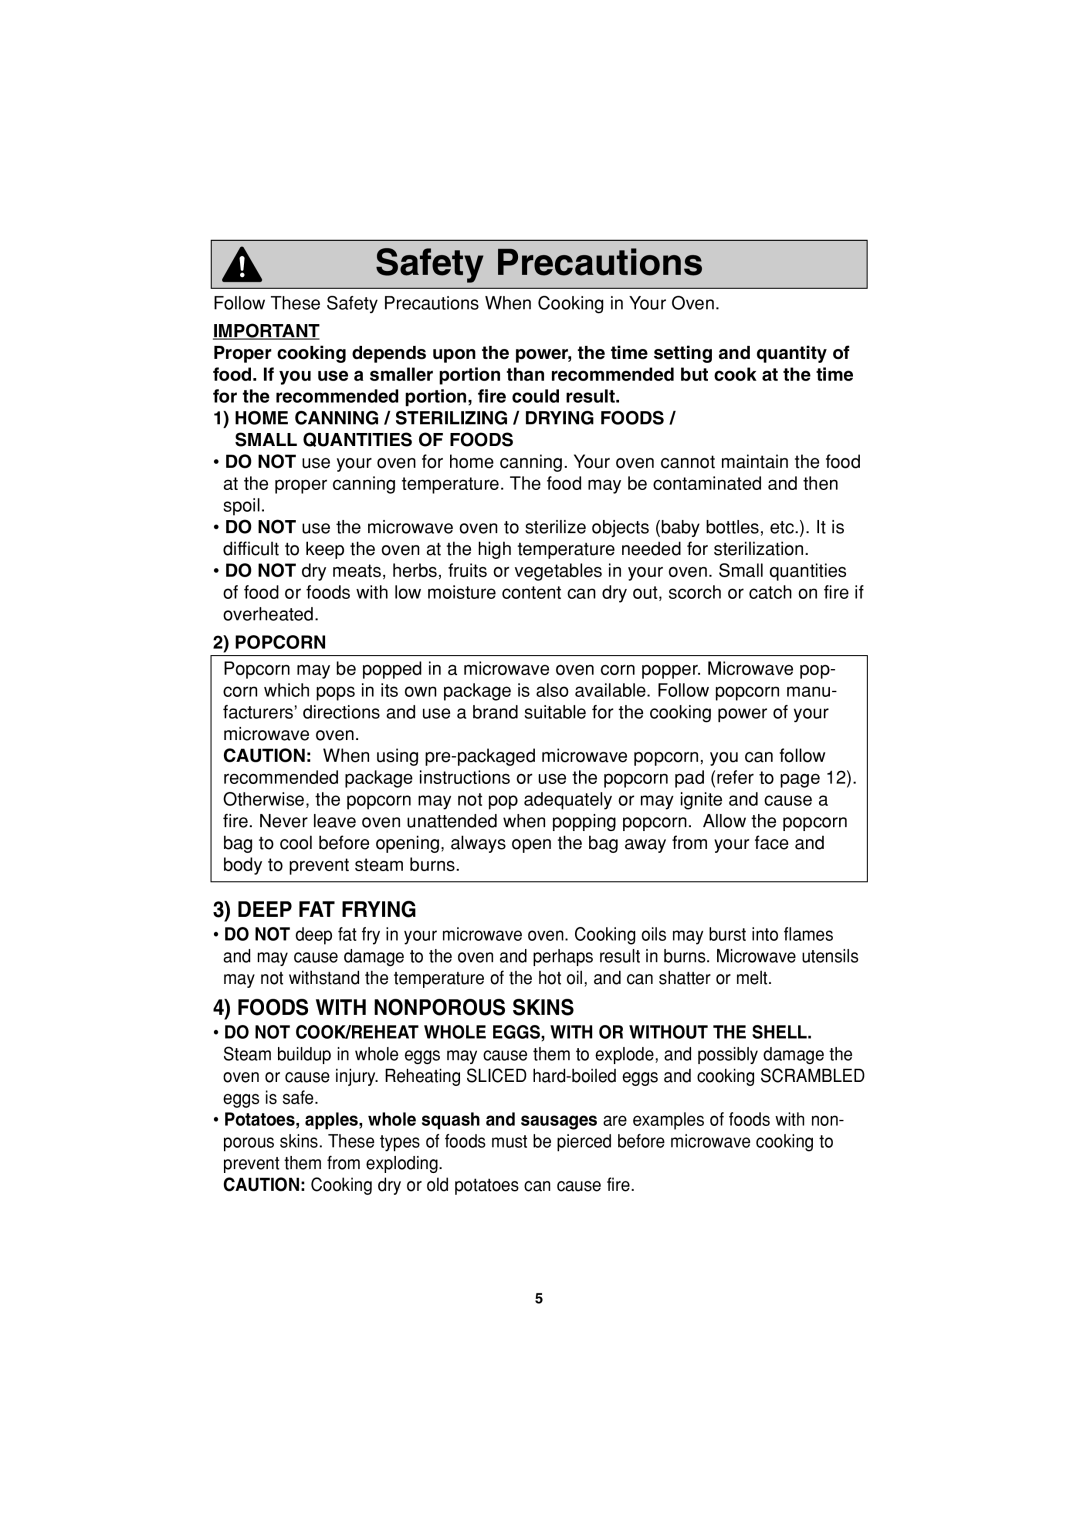 Panasonic NN-S443 important safety instructions Safety Precautions, Deep Fat Frying, Foods With Nonporous Skins 